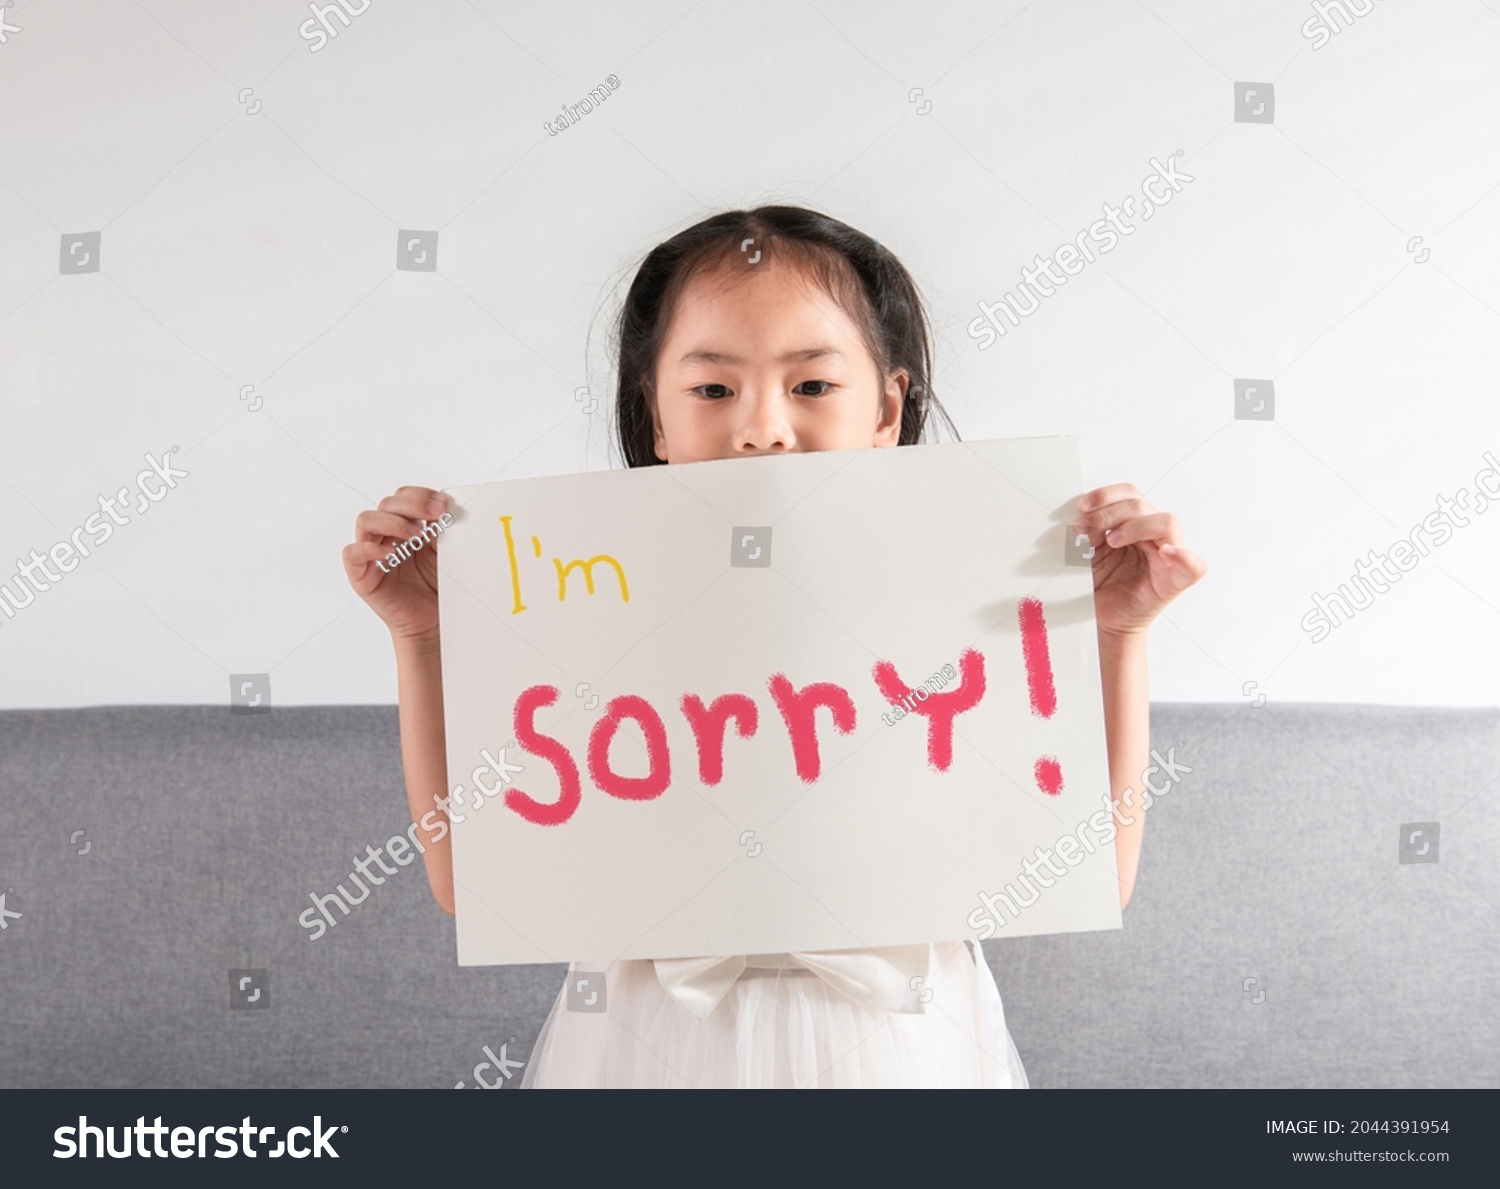 Cute Asian kid little toddler girl feels guilty is holding a sign of "I'm sorry" written on a white paper to apologize to her mother, father, or teacher for her mistake at home or school. #2044391954